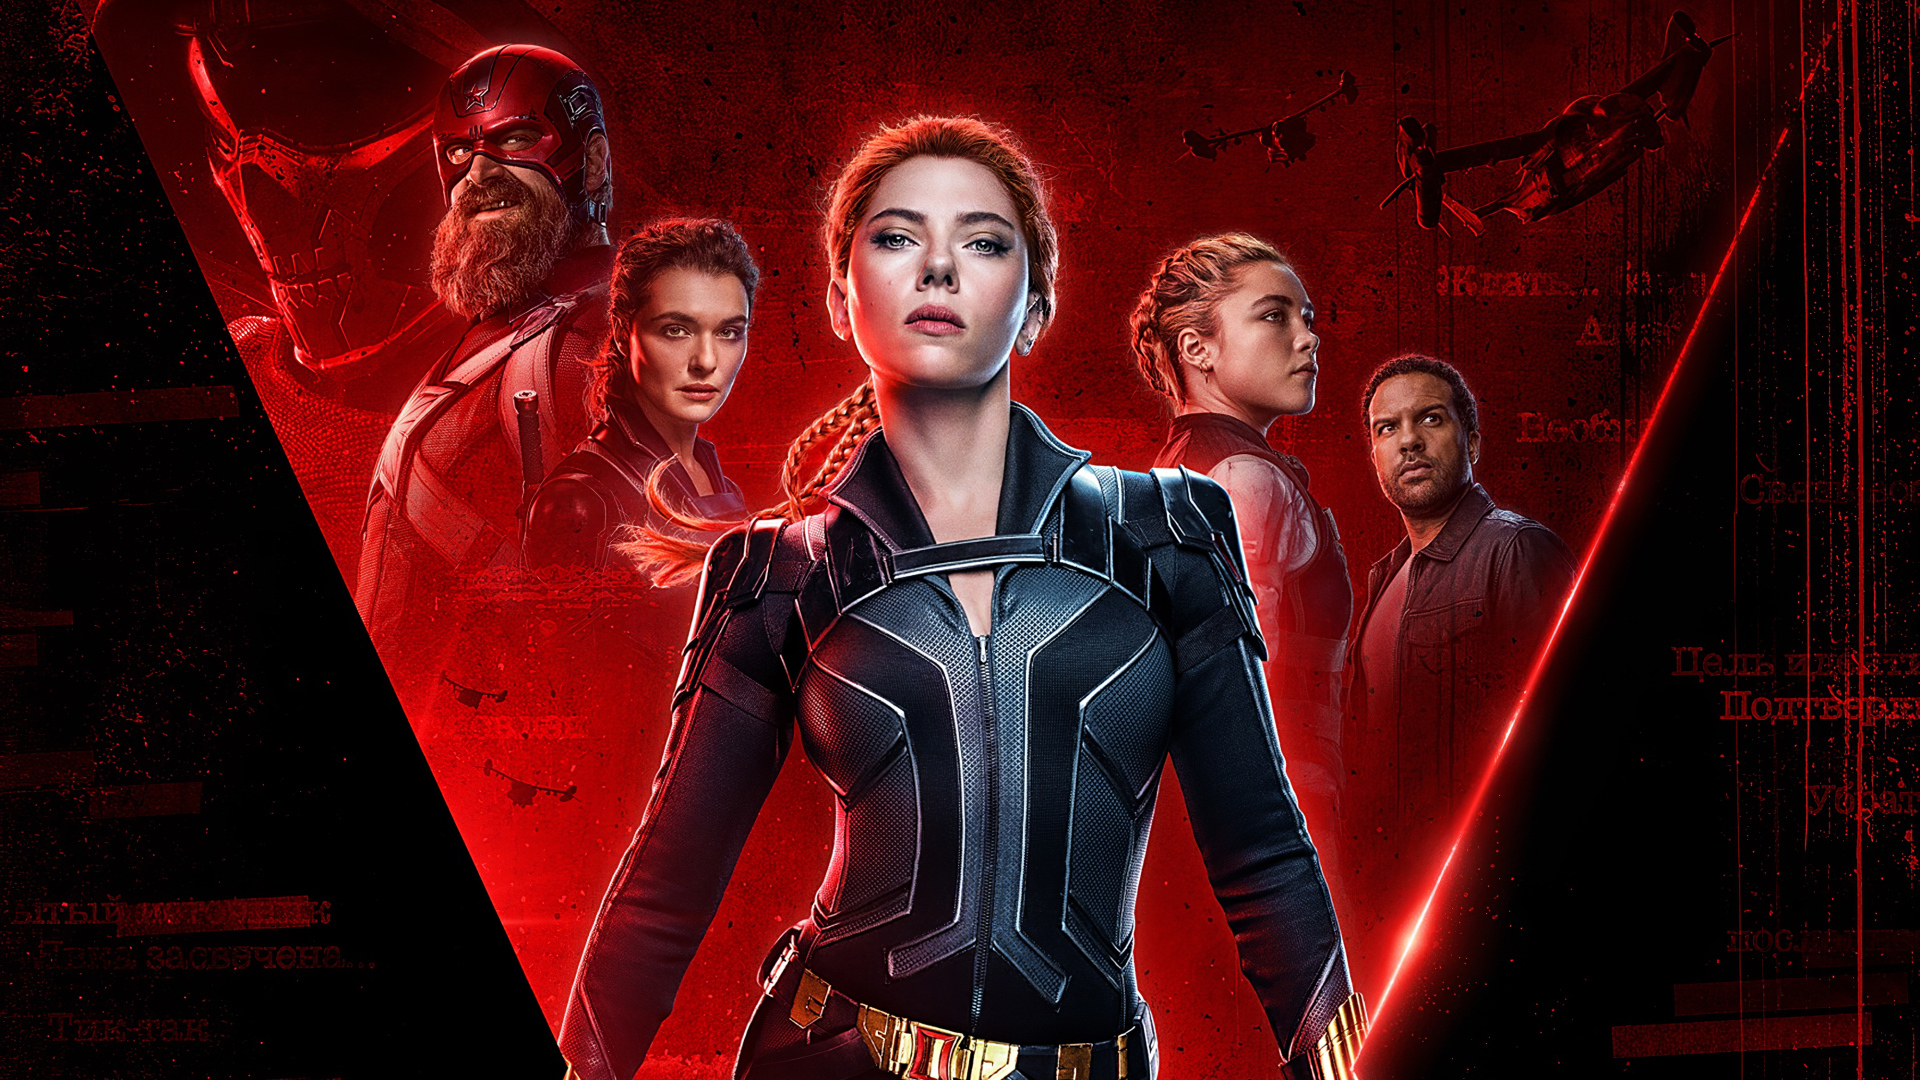 Poster with the characters of the movie Black Widow, 2020